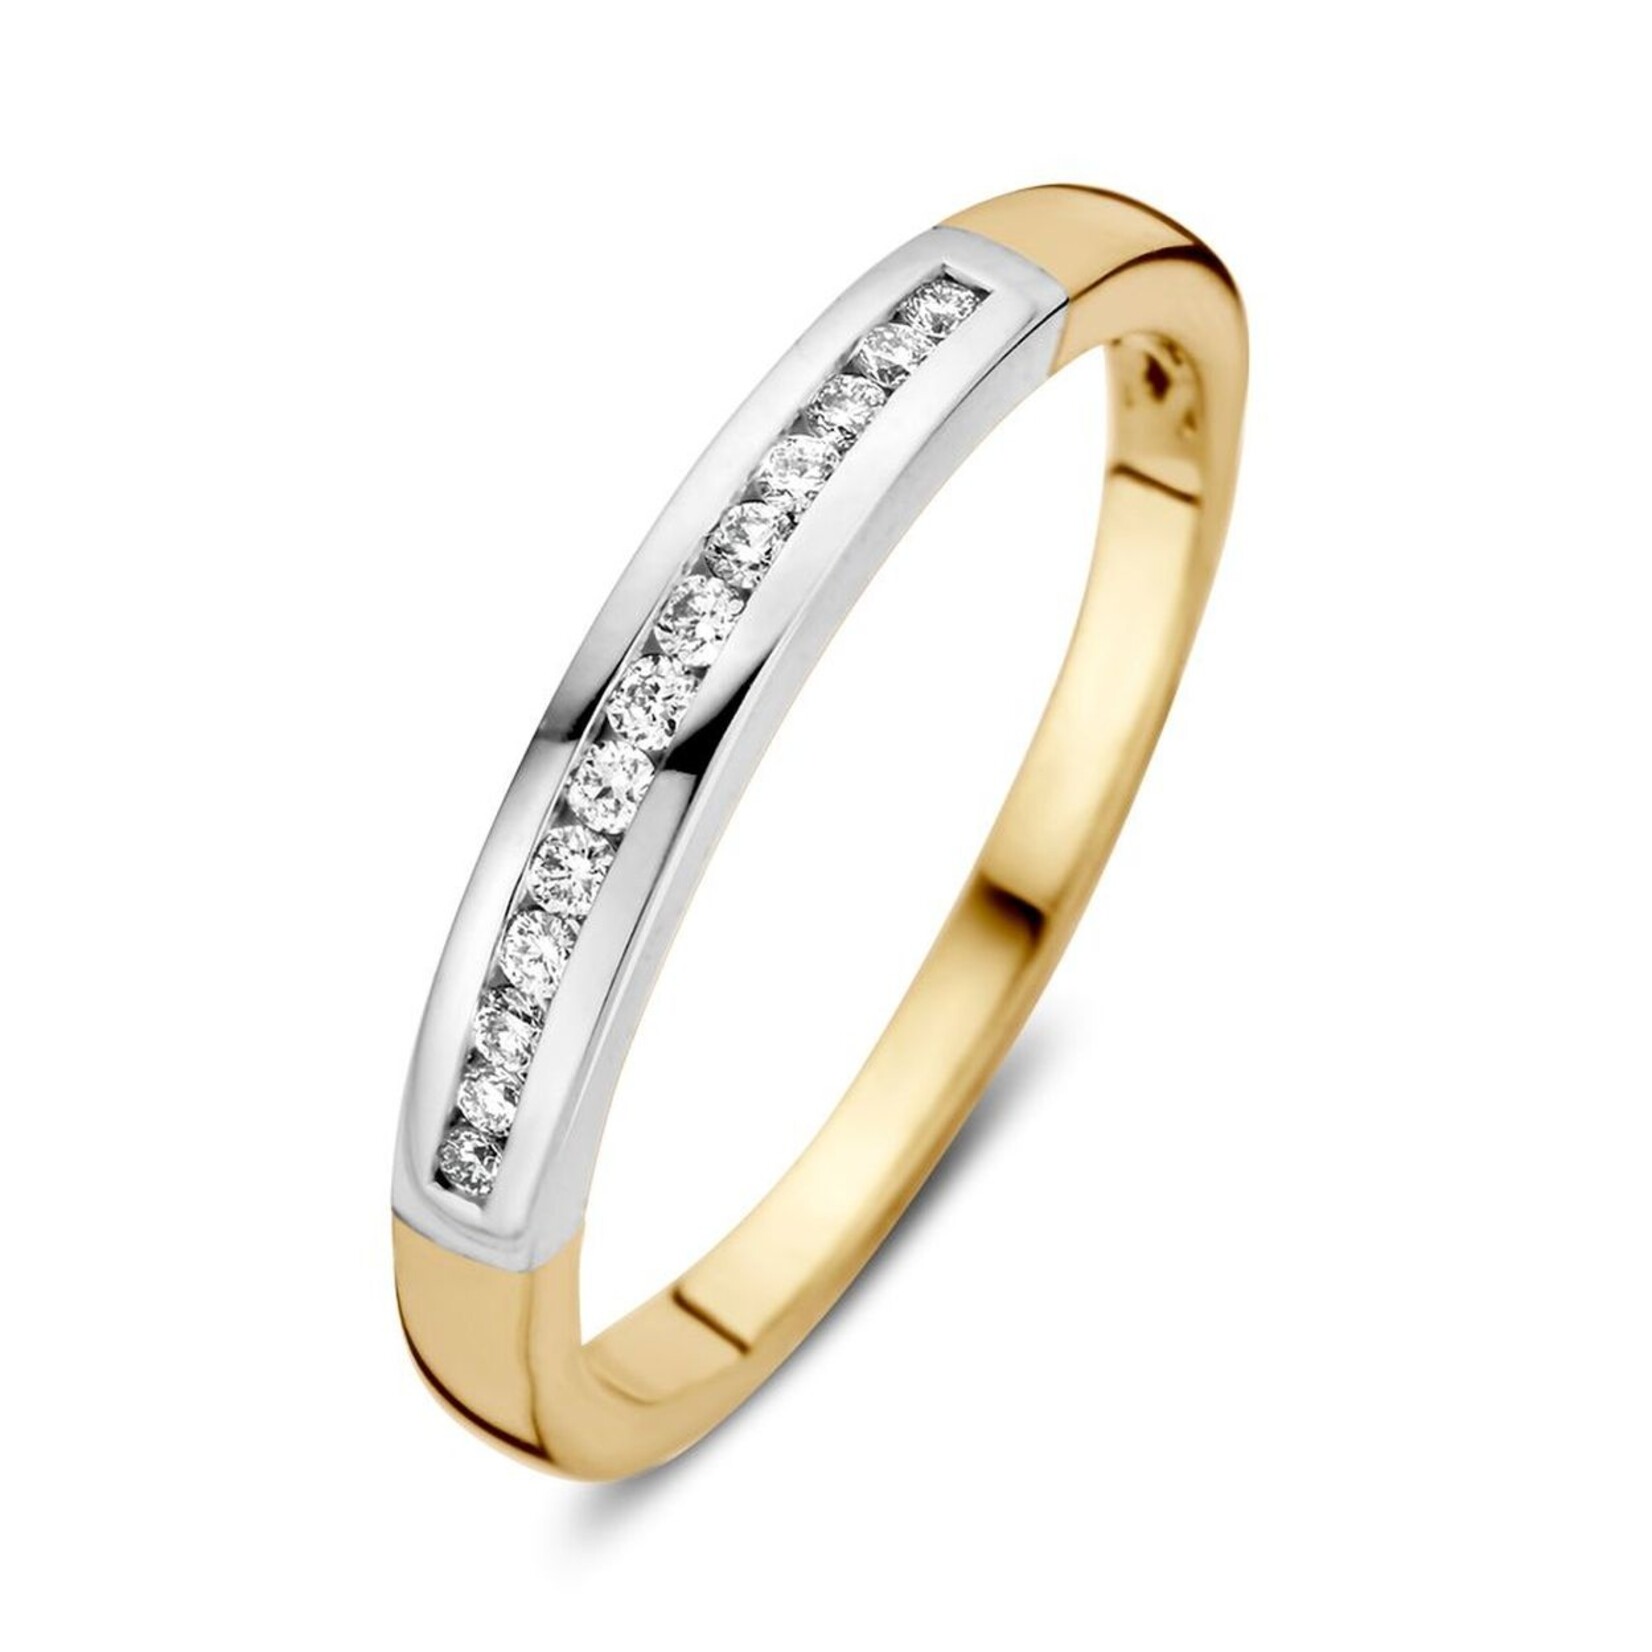 Excellent Jewelry Excellent Jewelry bicolor briljant ring rp416915 maat 17.75 (56) h-si1 0.12ct